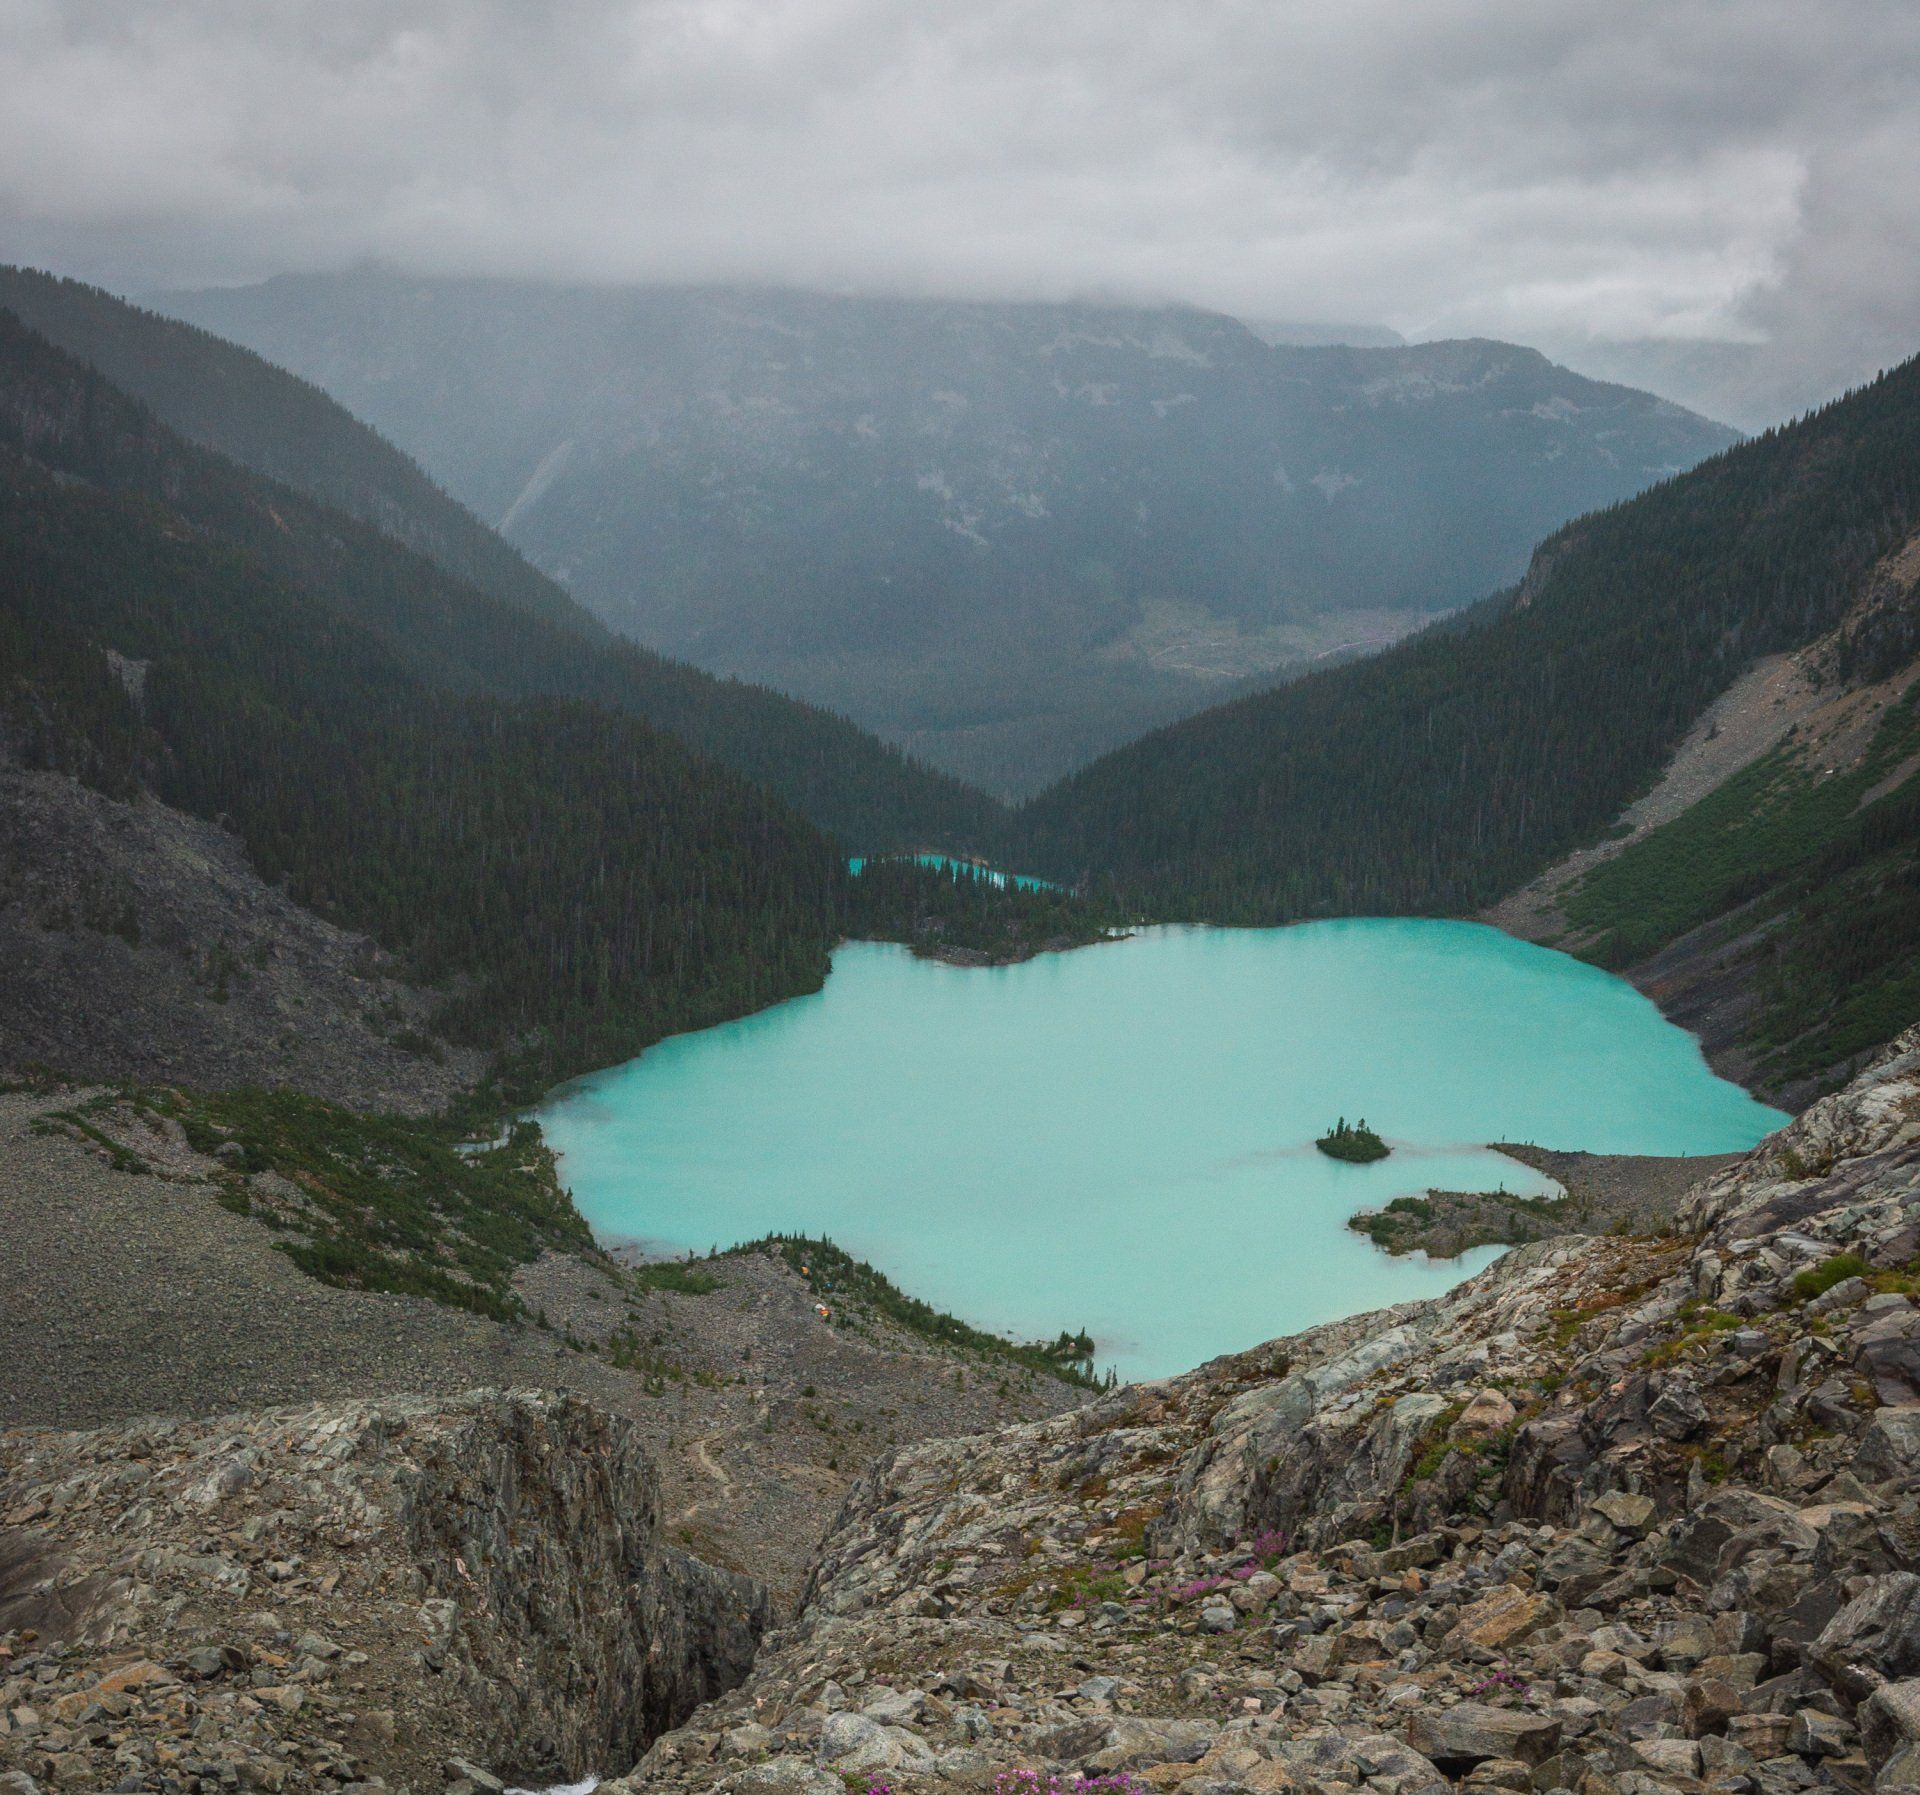 View of the upper Joffre lake from above, Joffre Lakes Provincial Park, BC, Canada